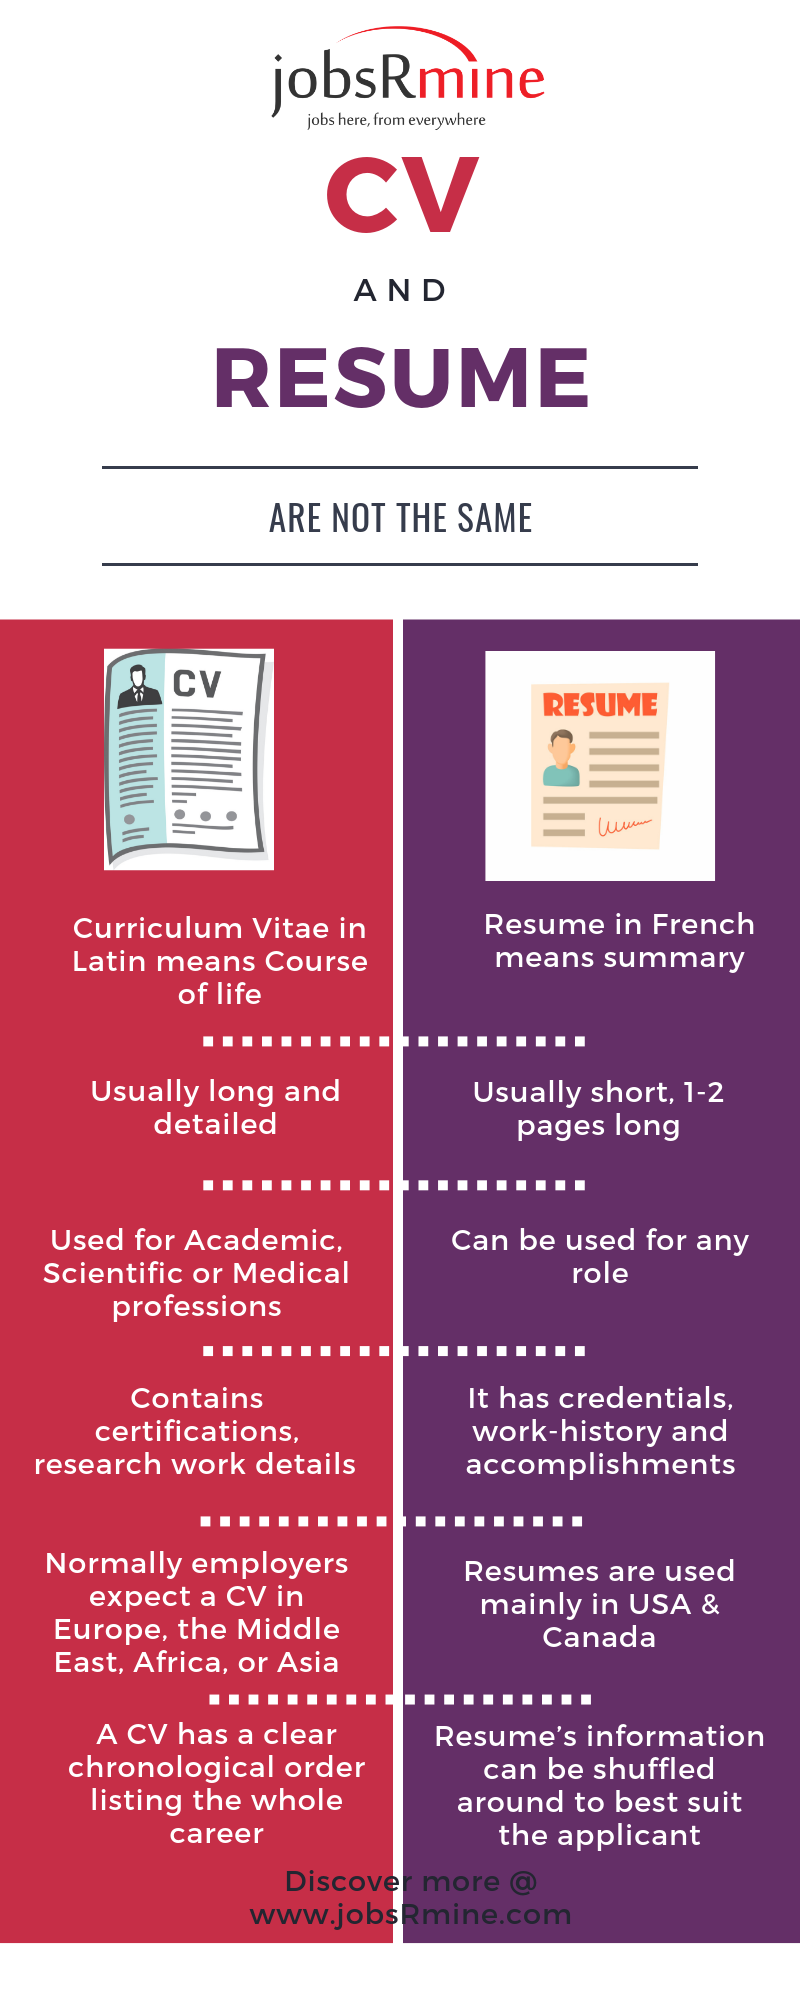 Download Difference between CV and a Resume for free, by clicking download button